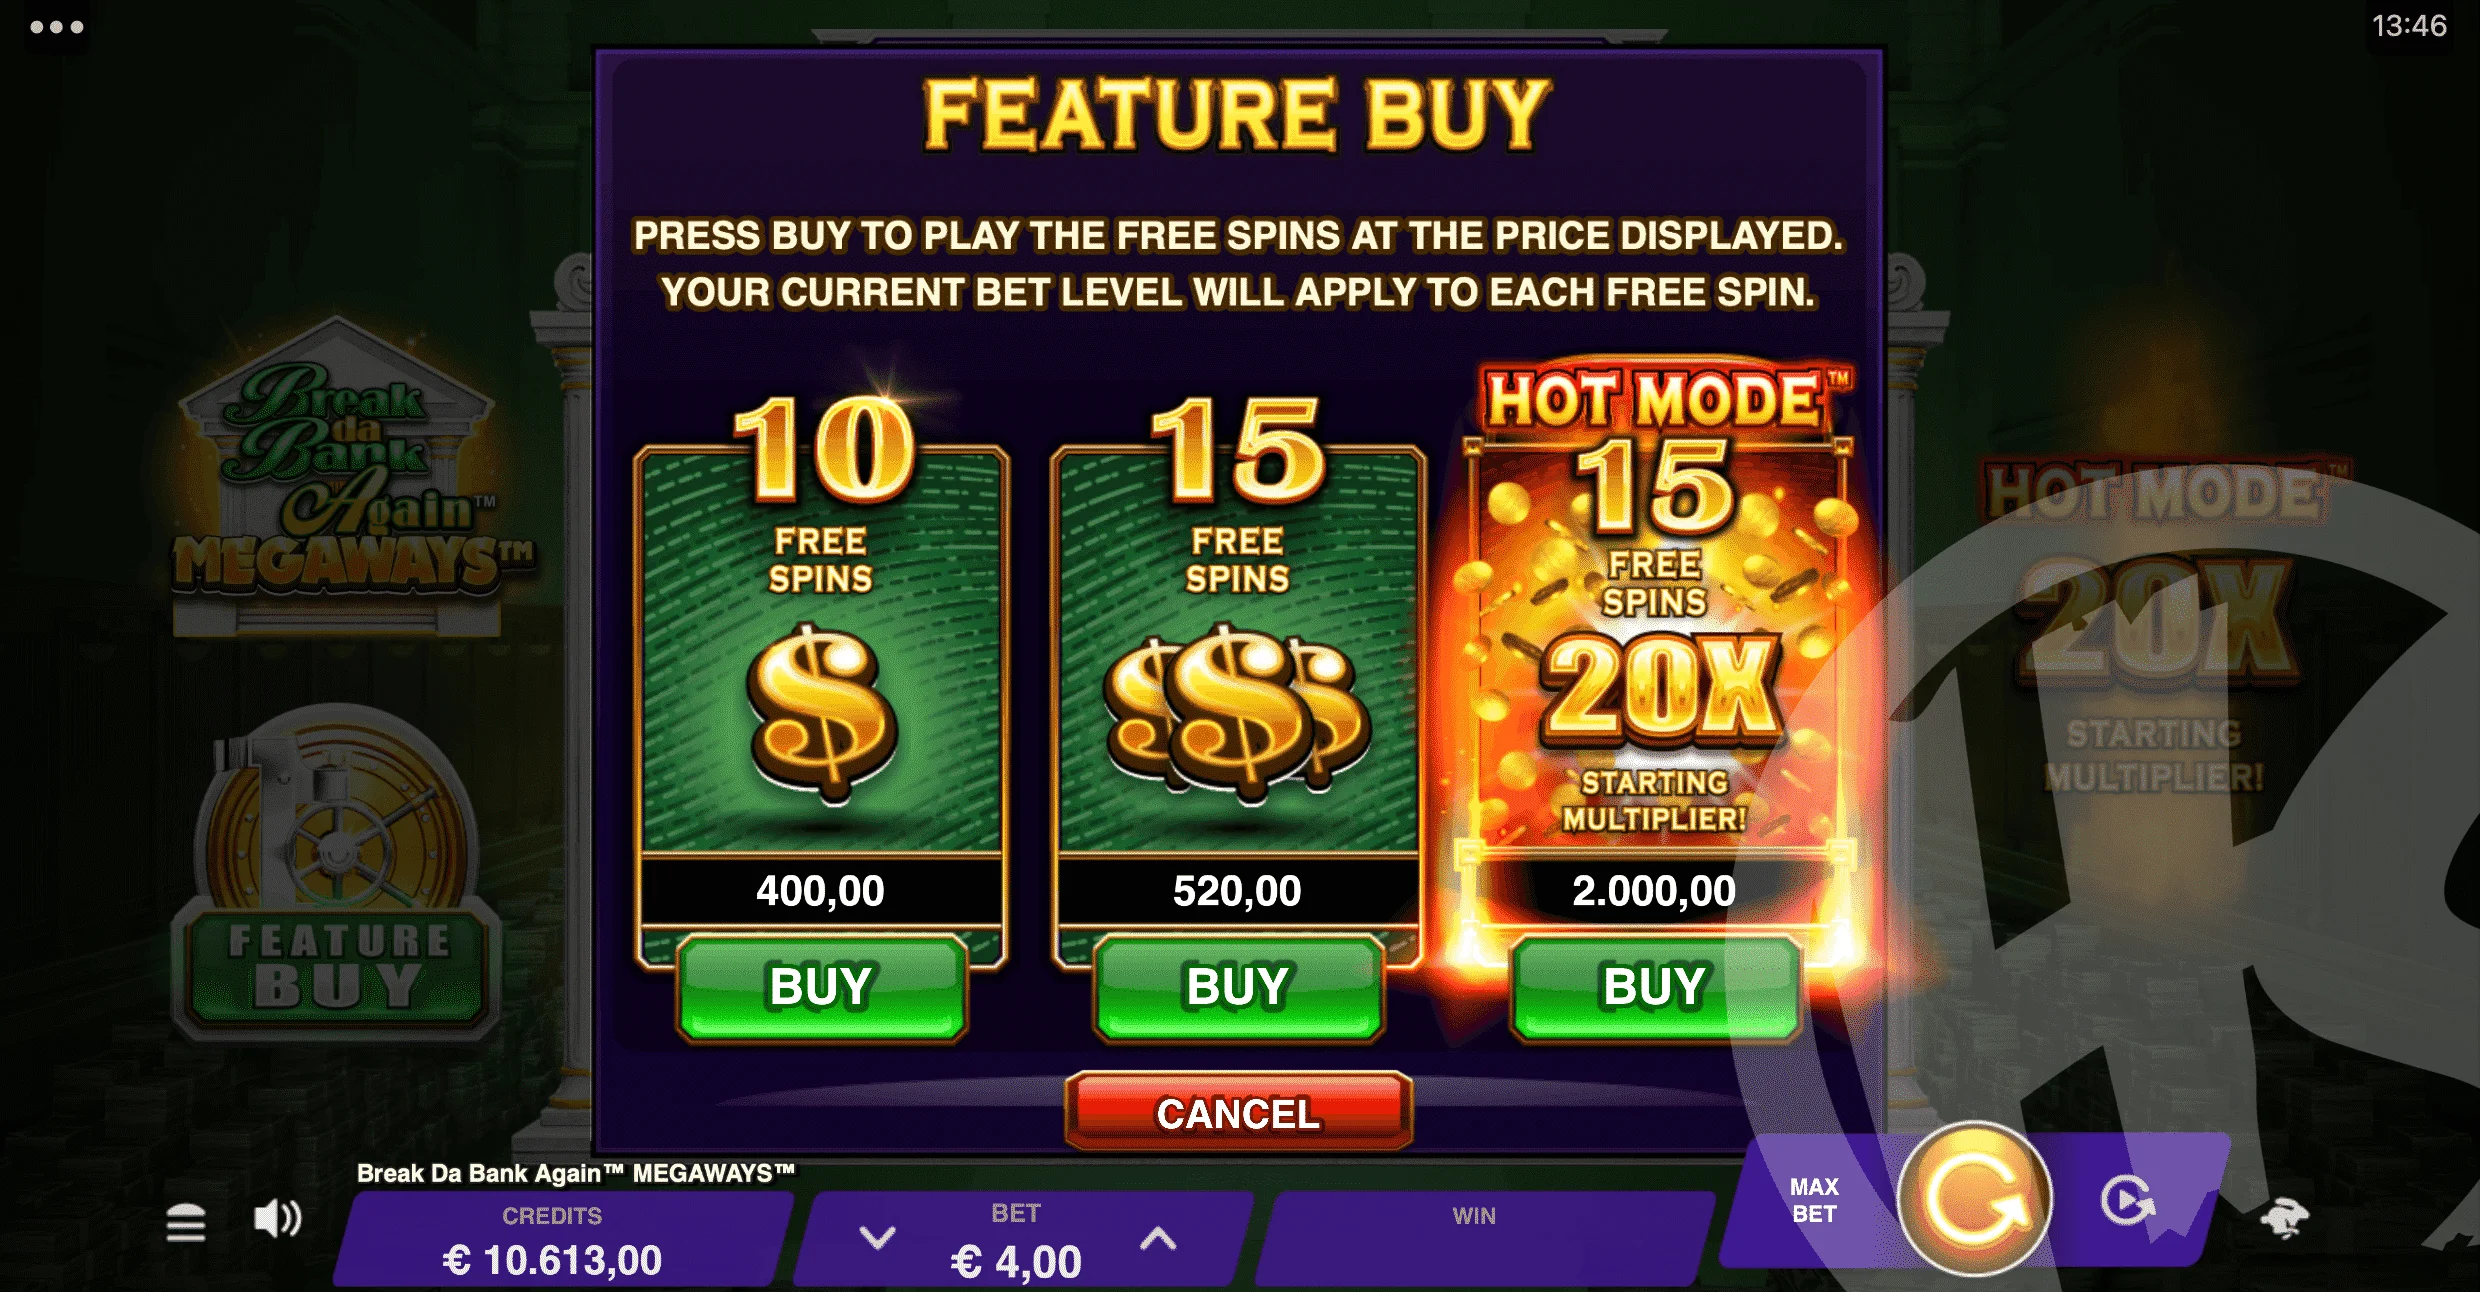 3 Feature Buy Options are Available - Costing 100x, 130x or 500x Bet